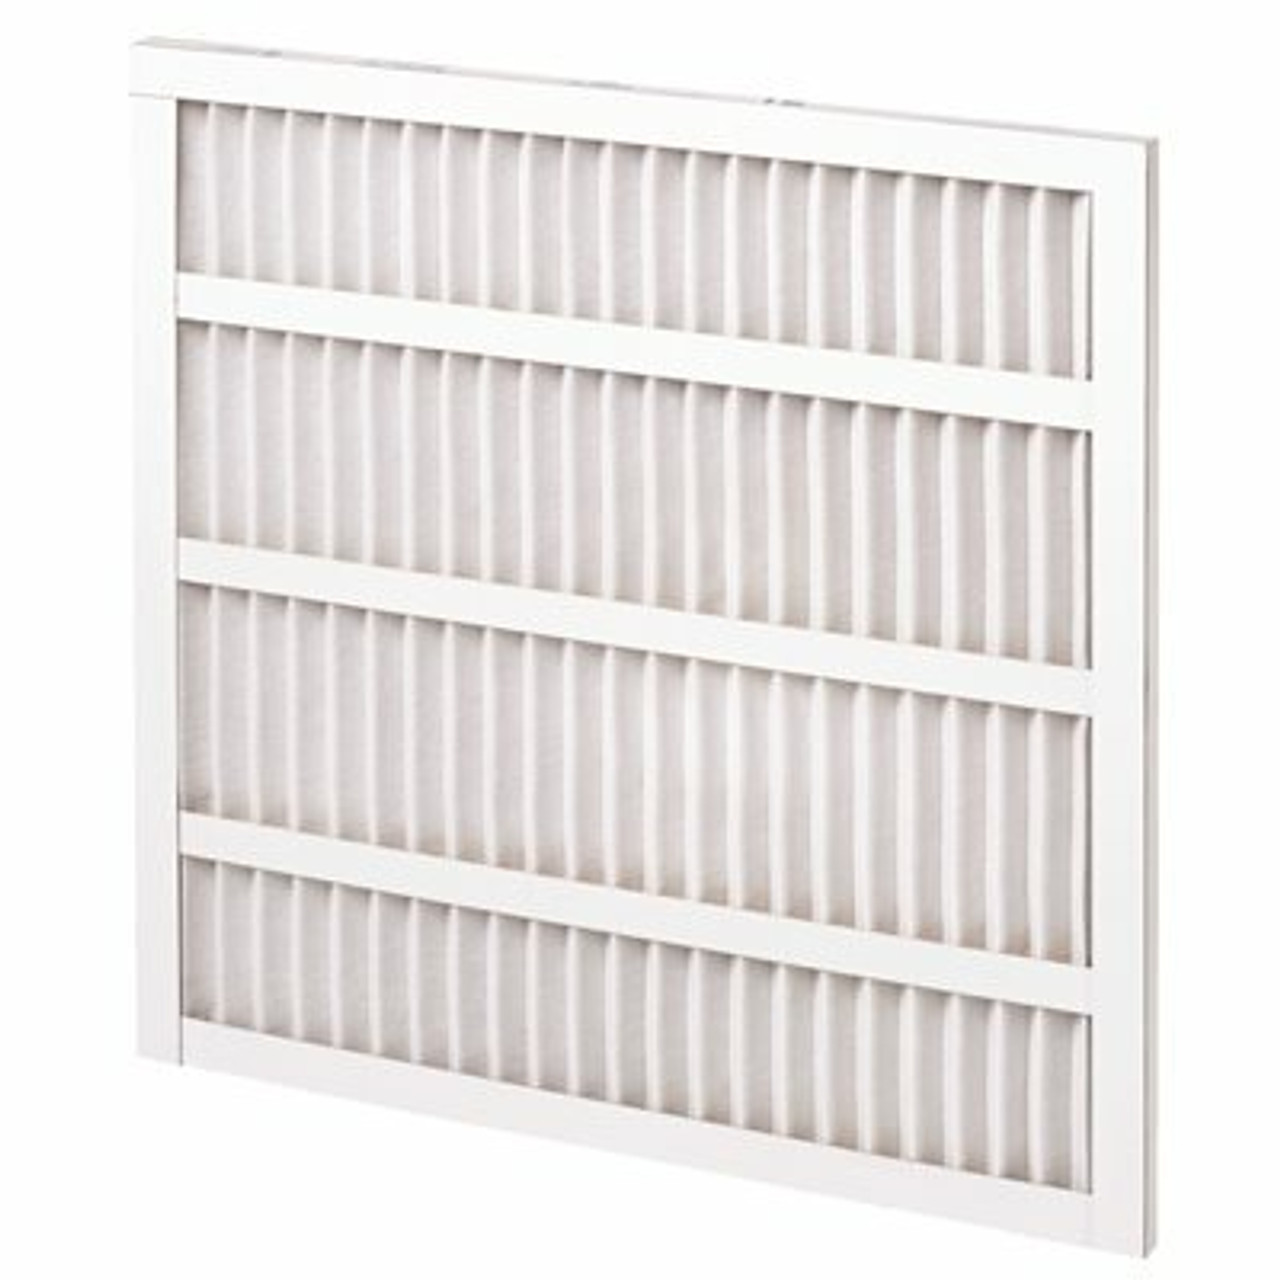 15 In. X 20 In. X 1 Pleated Air Filter Standard Capacity Self Supported MERV 8 (12-Case)